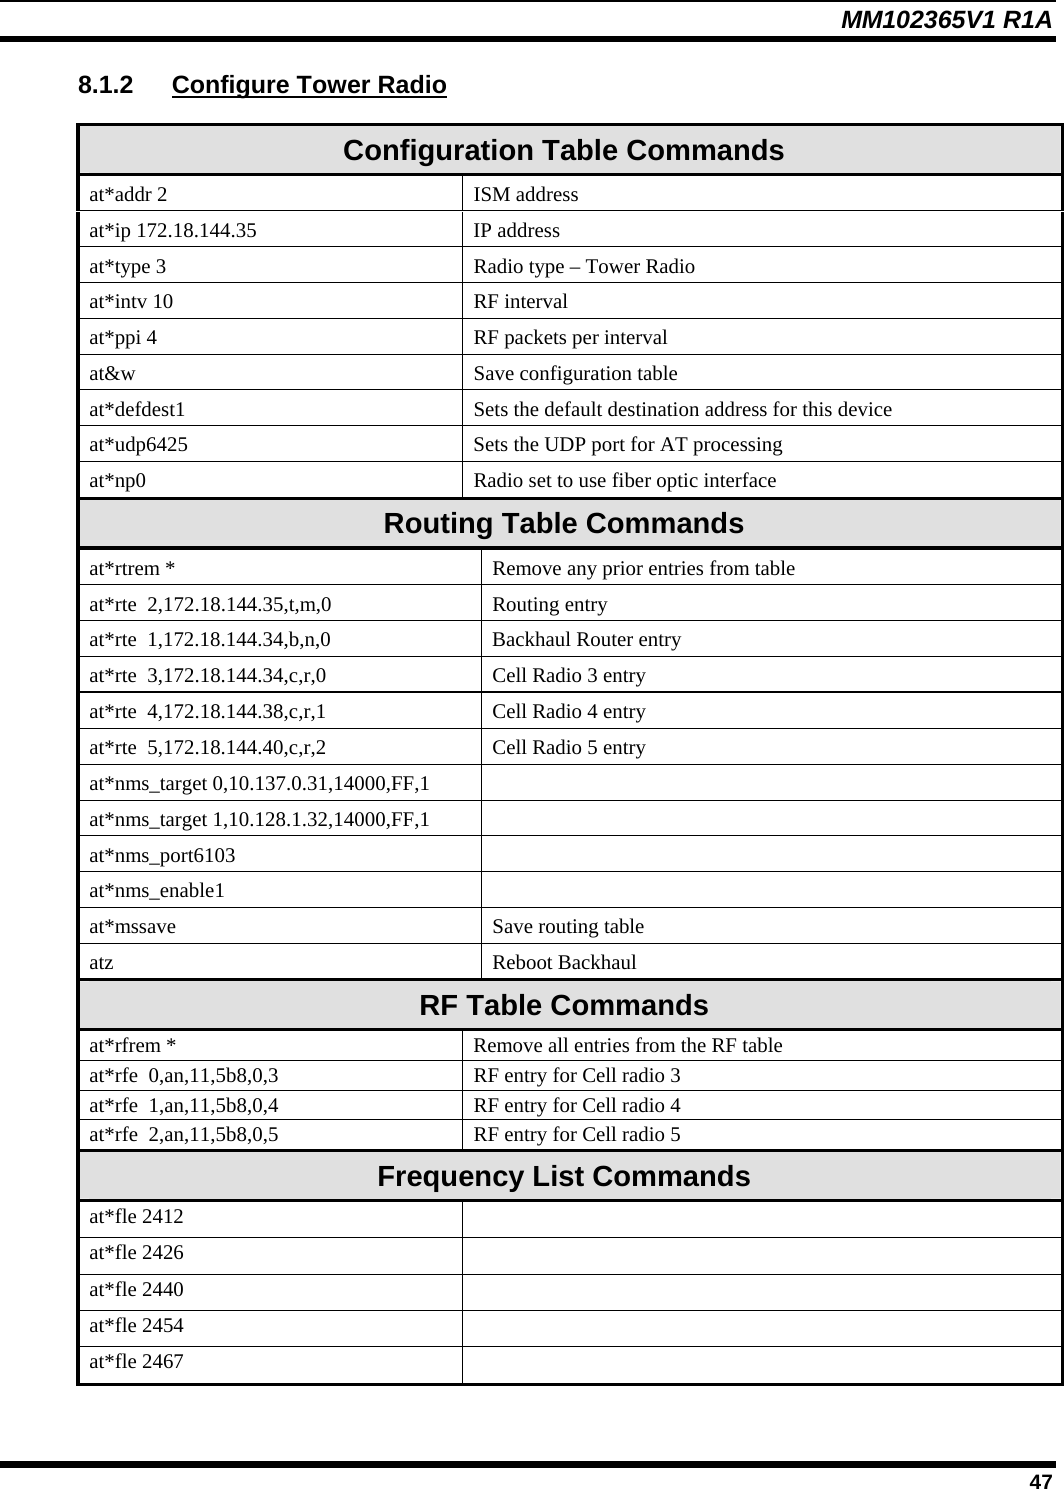 MM102365V1 R1A 8.1.2  Configure Tower Radio  Configuration Table Commands at*addr 2  ISM address at*ip 172.18.144.35  IP address at*type 3  Radio type – Tower Radio at*intv 10  RF interval at*ppi 4  RF packets per interval at&amp;w  Save configuration table at*defdest1  Sets the default destination address for this device at*udp6425  Sets the UDP port for AT processing at*np0  Radio set to use fiber optic interface Routing Table Commands at*rtrem *  Remove any prior entries from table at*rte  2,172.18.144.35,t,m,0  Routing entry at*rte  1,172.18.144.34,b,n,0  Backhaul Router entry at*rte  3,172.18.144.34,c,r,0  Cell Radio 3 entry at*rte  4,172.18.144.38,c,r,1  Cell Radio 4 entry at*rte  5,172.18.144.40,c,r,2  Cell Radio 5 entry at*nms_target 0,10.137.0.31,14000,FF,1   at*nms_target 1,10.128.1.32,14000,FF,1   at*nms_port6103  at*nms_enable1  at*mssave  Save routing table atz Reboot Backhaul RF Table Commands at*rfrem *  Remove all entries from the RF table at*rfe  0,an,11,5b8,0,3  RF entry for Cell radio 3 at*rfe  1,an,11,5b8,0,4  RF entry for Cell radio 4 at*rfe  2,an,11,5b8,0,5  RF entry for Cell radio 5 Frequency List Commands at*fle 2412   at*fle 2426   at*fle 2440   at*fle 2454   at*fle 2467    47 